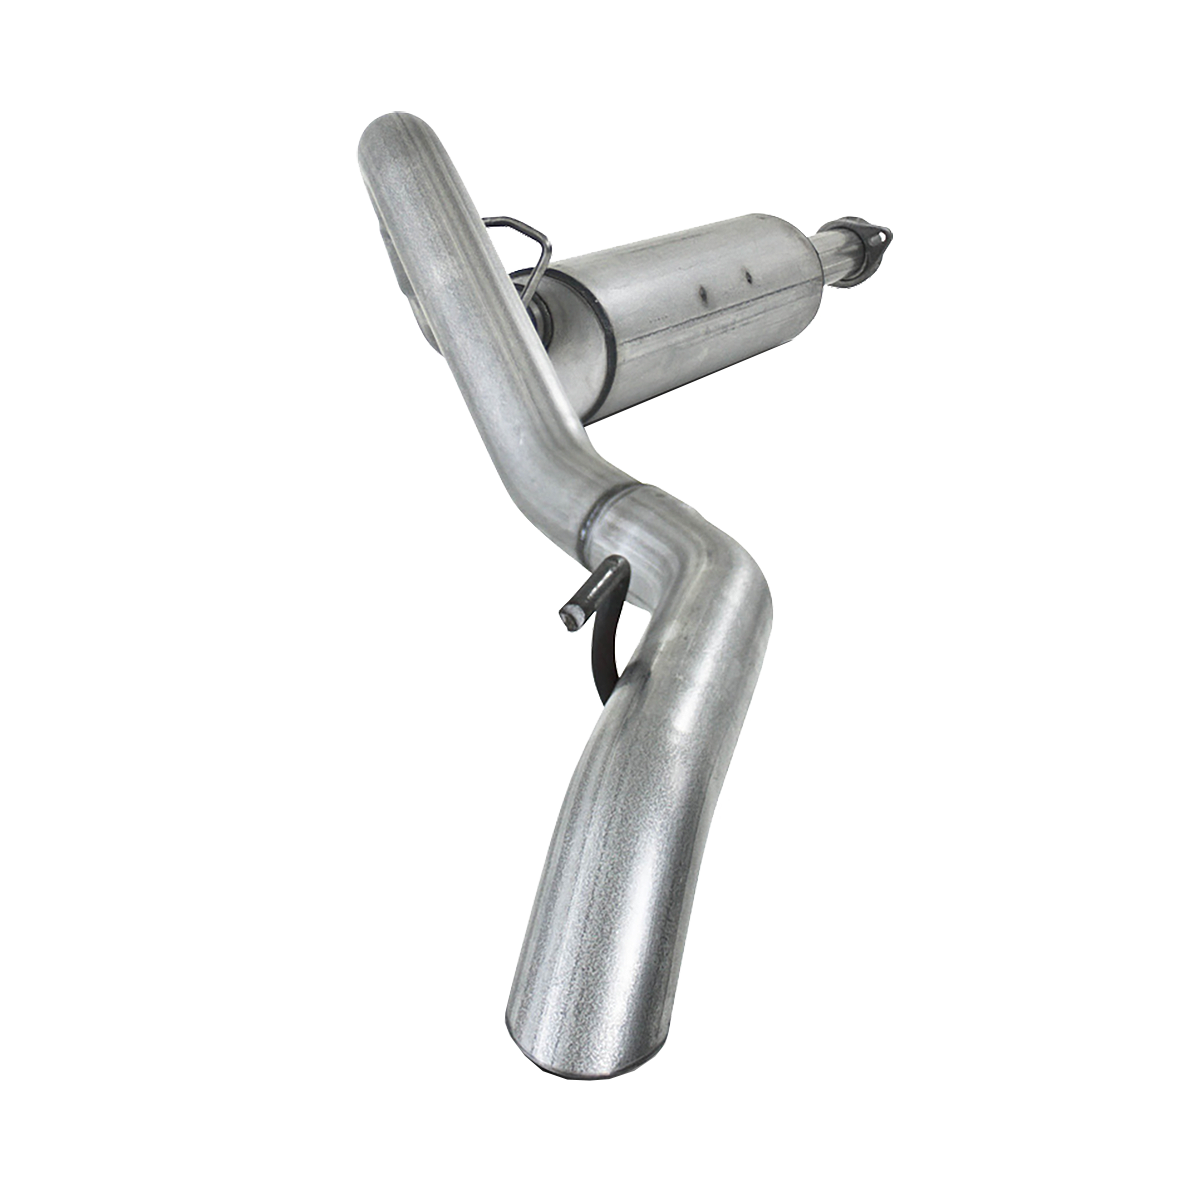 MBRP - MBRP Cat Back Exhaust System Single Aluminized Steel For 04-06 Jeep Wrangler TJ Unlimited, 4.0L I-6 S5520AL